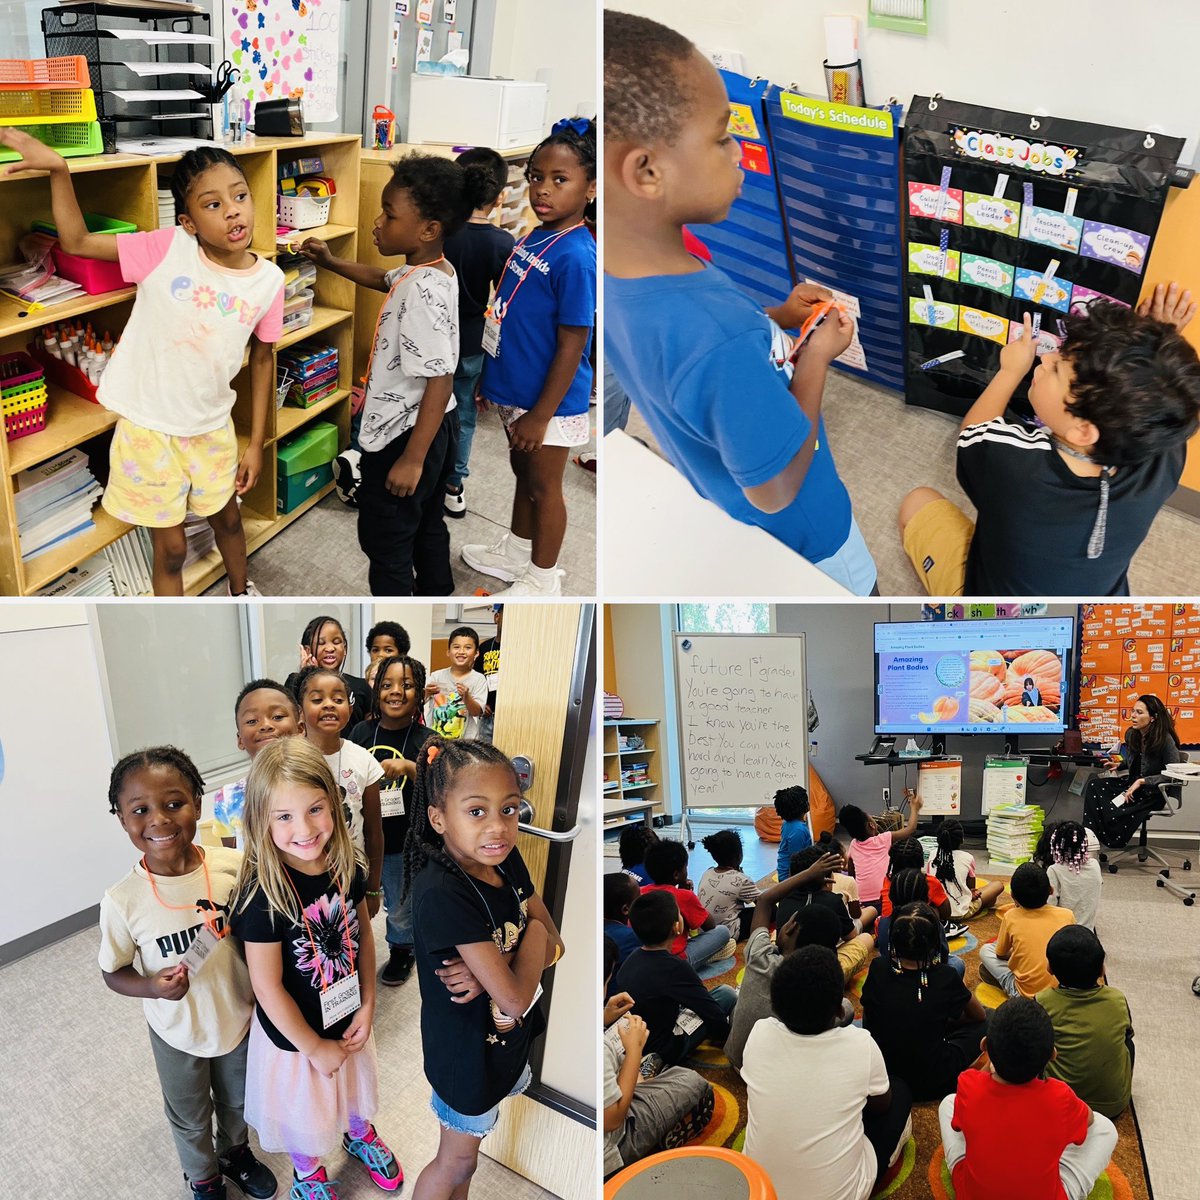 💙Kindergarten is preparing to move from the Green Neighborhood to the 1st grade Orange Neighborhood!🧡

😁 Their orientation included looking at class jobs & exploring future learning - all student led!

#AISDProud 
#KidsDeserveIt